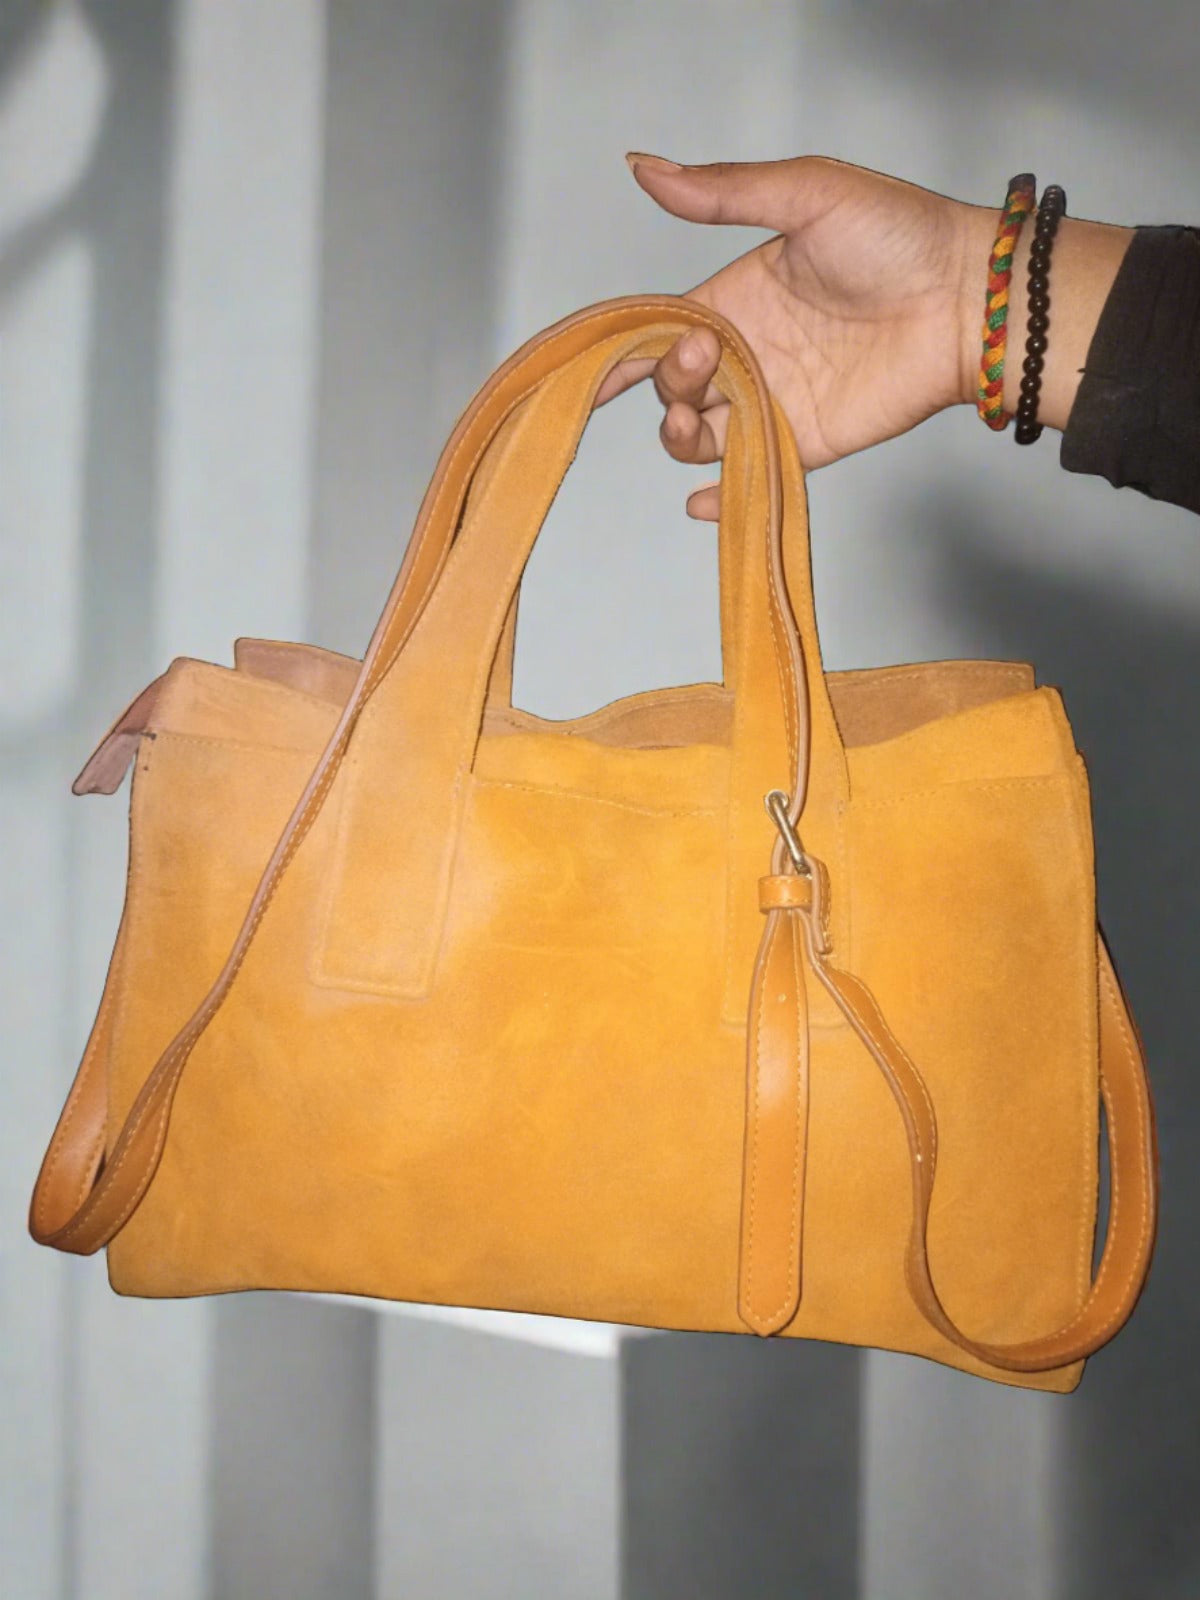 PILLAA Women Leather Brown Handheld Bag," Carry your belongings in style".